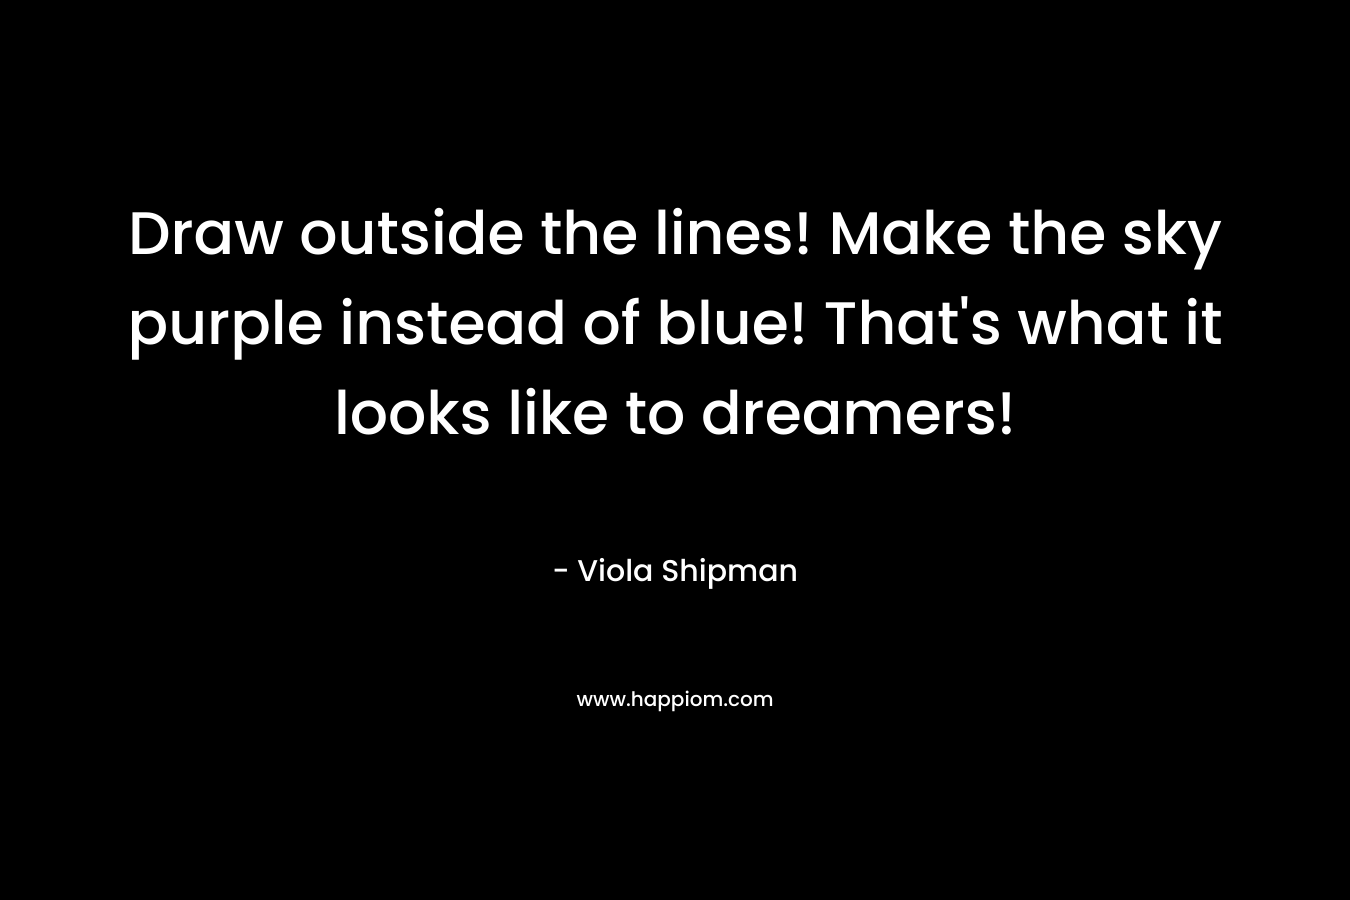 Draw outside the lines! Make the sky purple instead of blue! That’s what it looks like to dreamers! – Viola Shipman